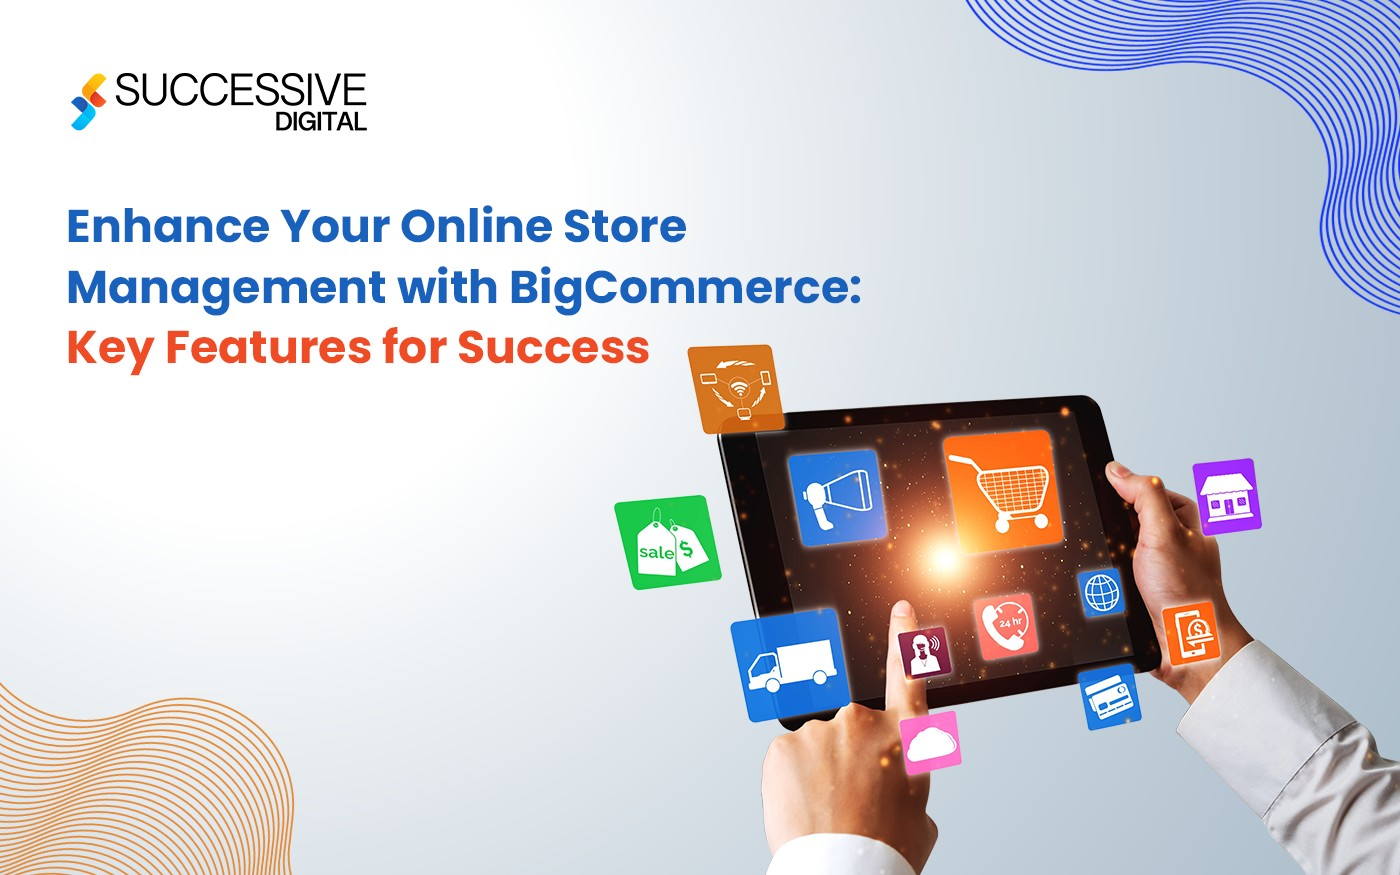 How to Enhance Onlione Store Management With BigCommerce?